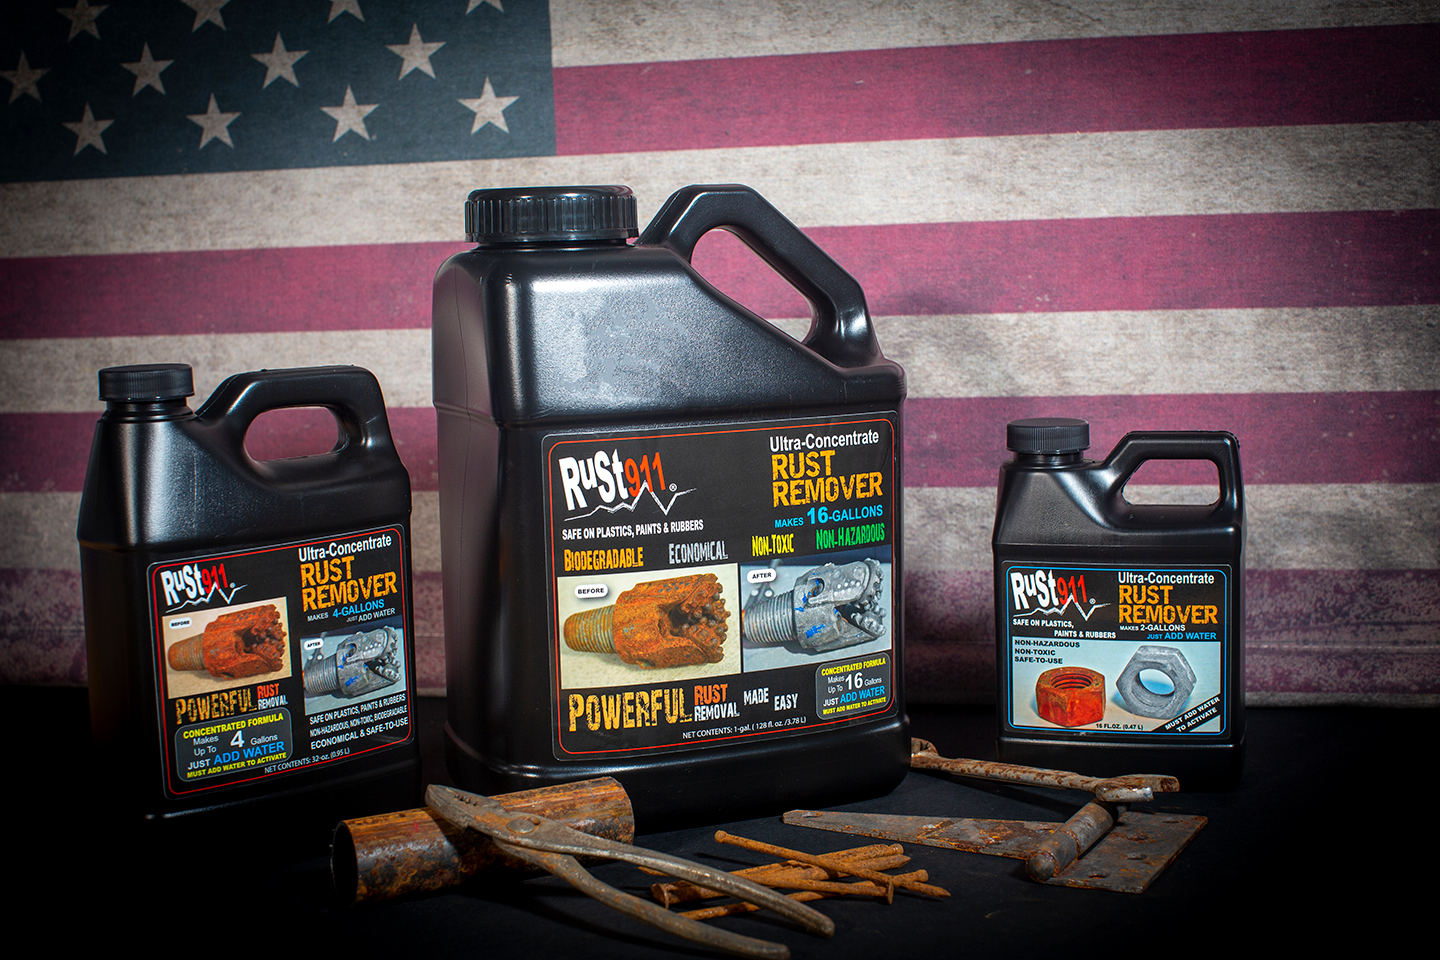 Rust911: Makes 4-gallons of Rust Remover Dissolver - Economical,  Safe-to-Use, No Acids - Fast Rust Removal Without Sanding or Harsh  Chemicals 